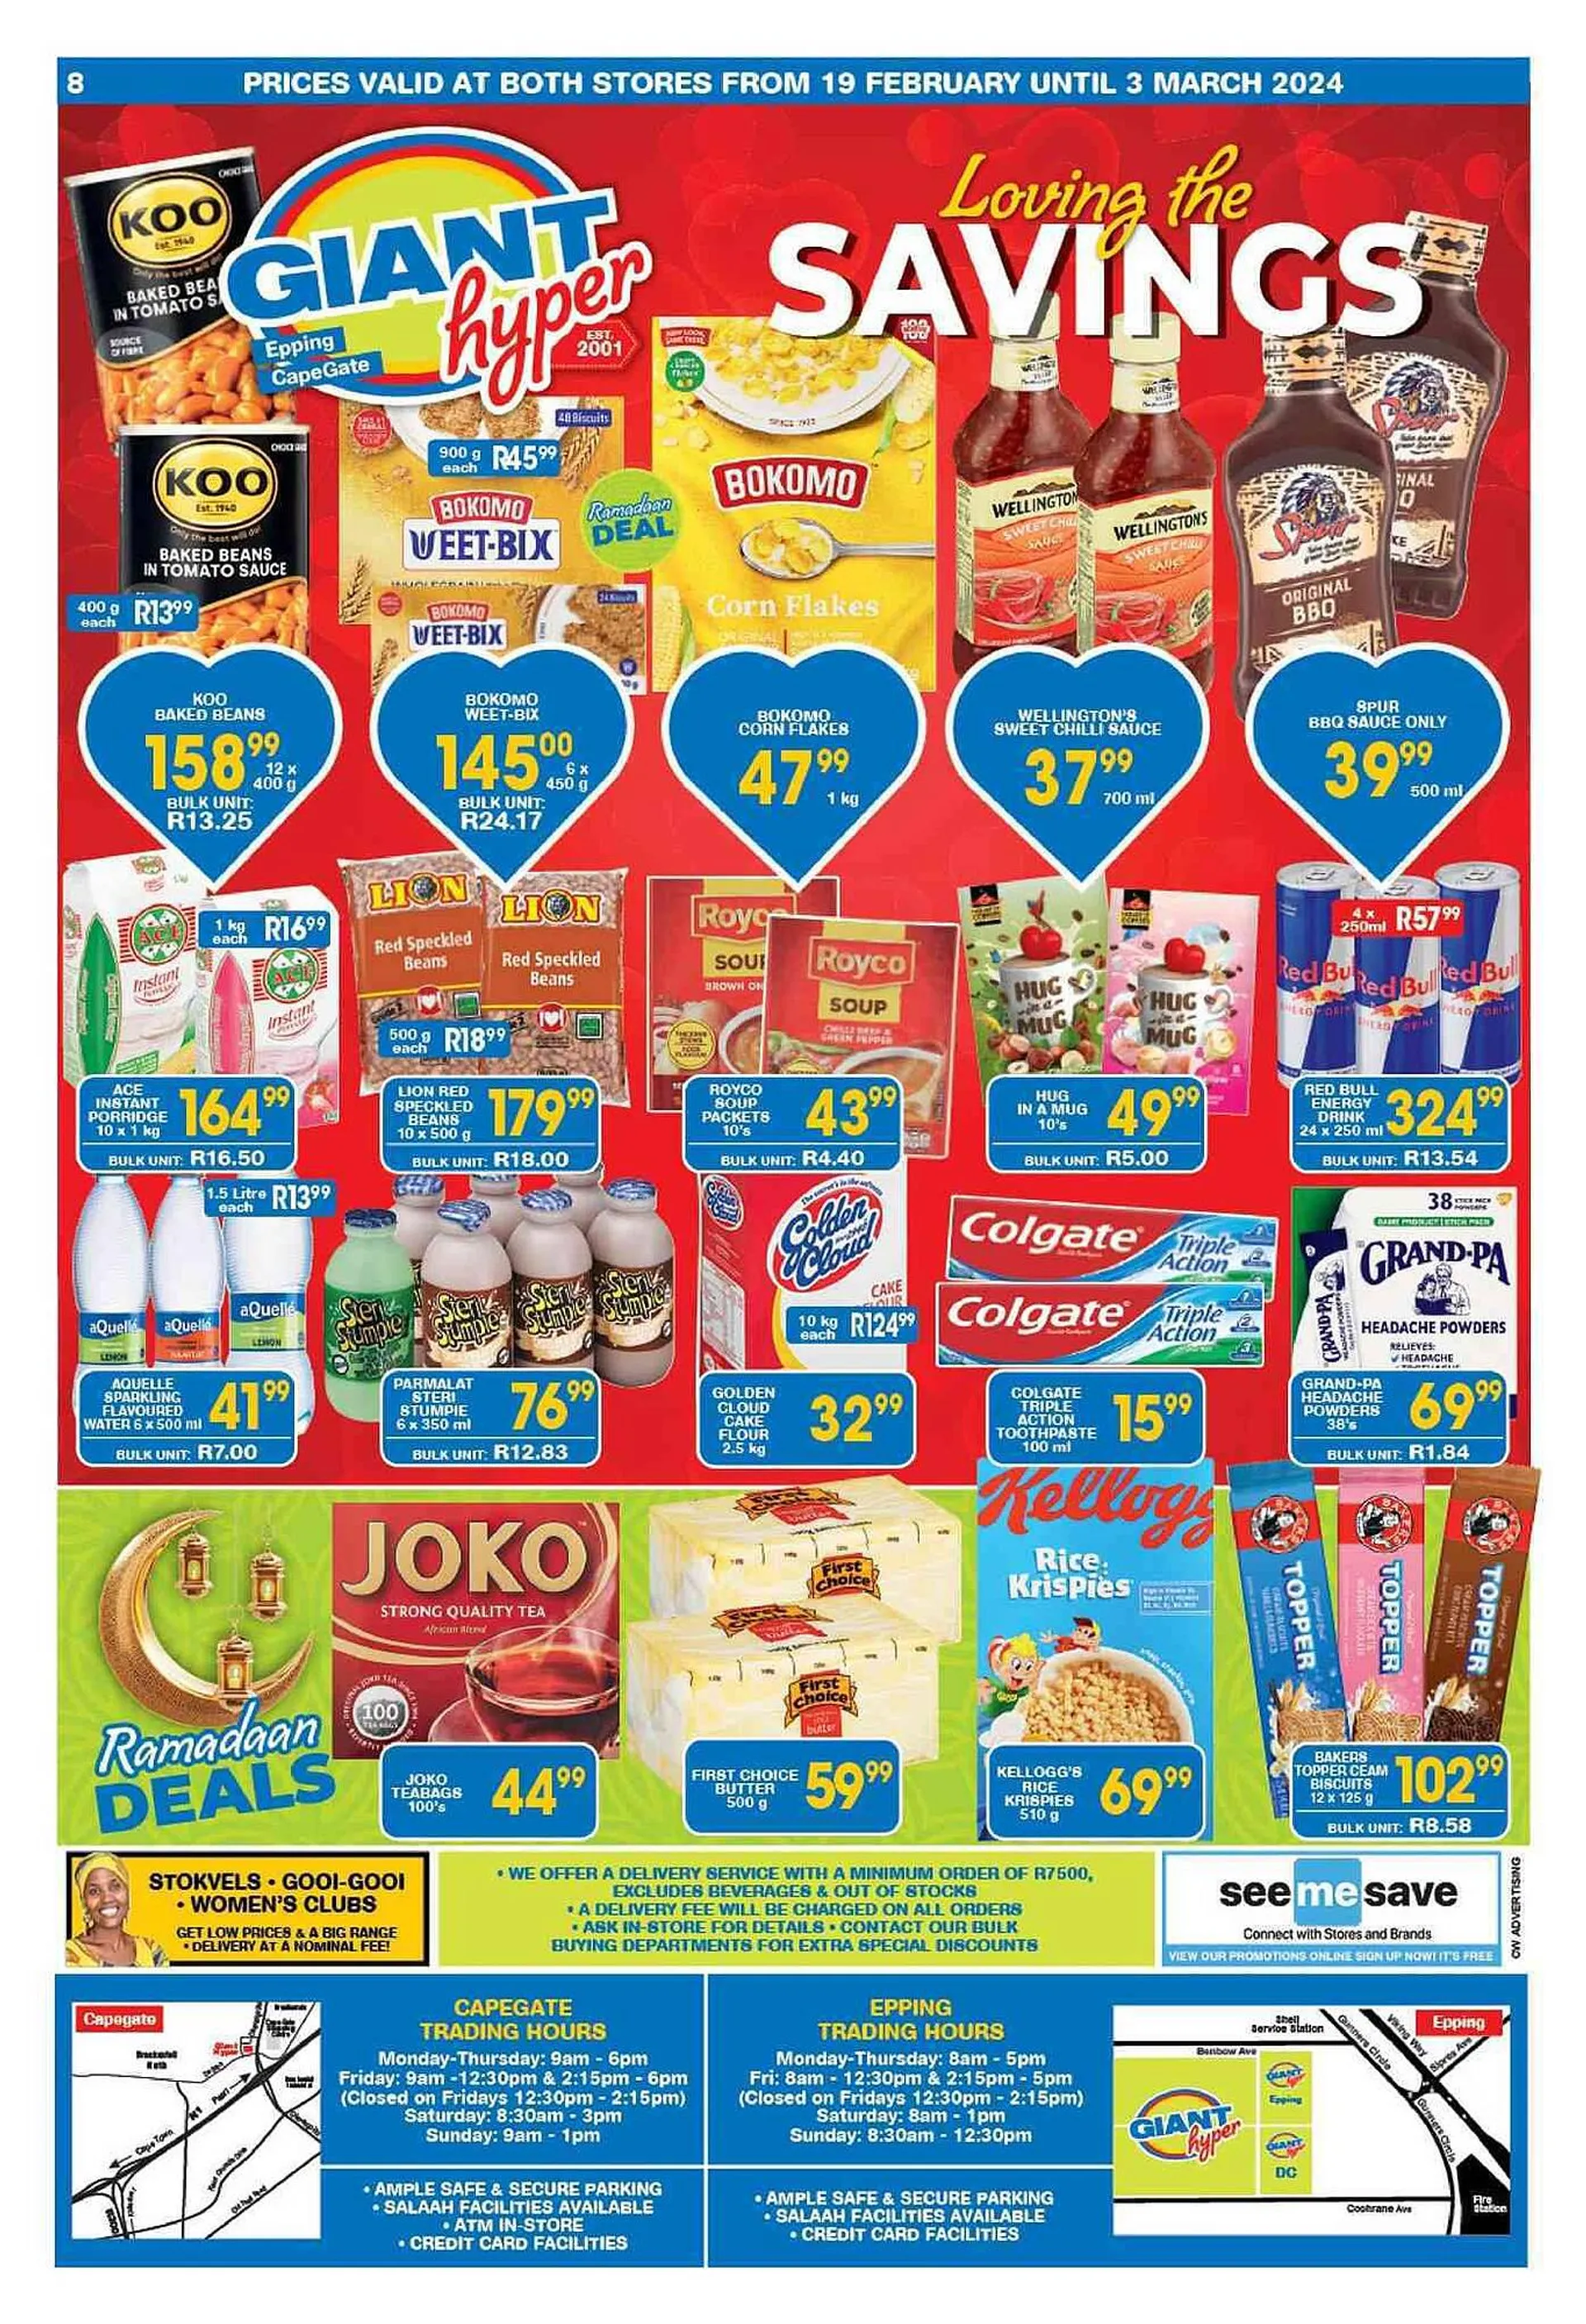 Giant Hyper catalogue - 19 February 3 March 2024 - Page 8